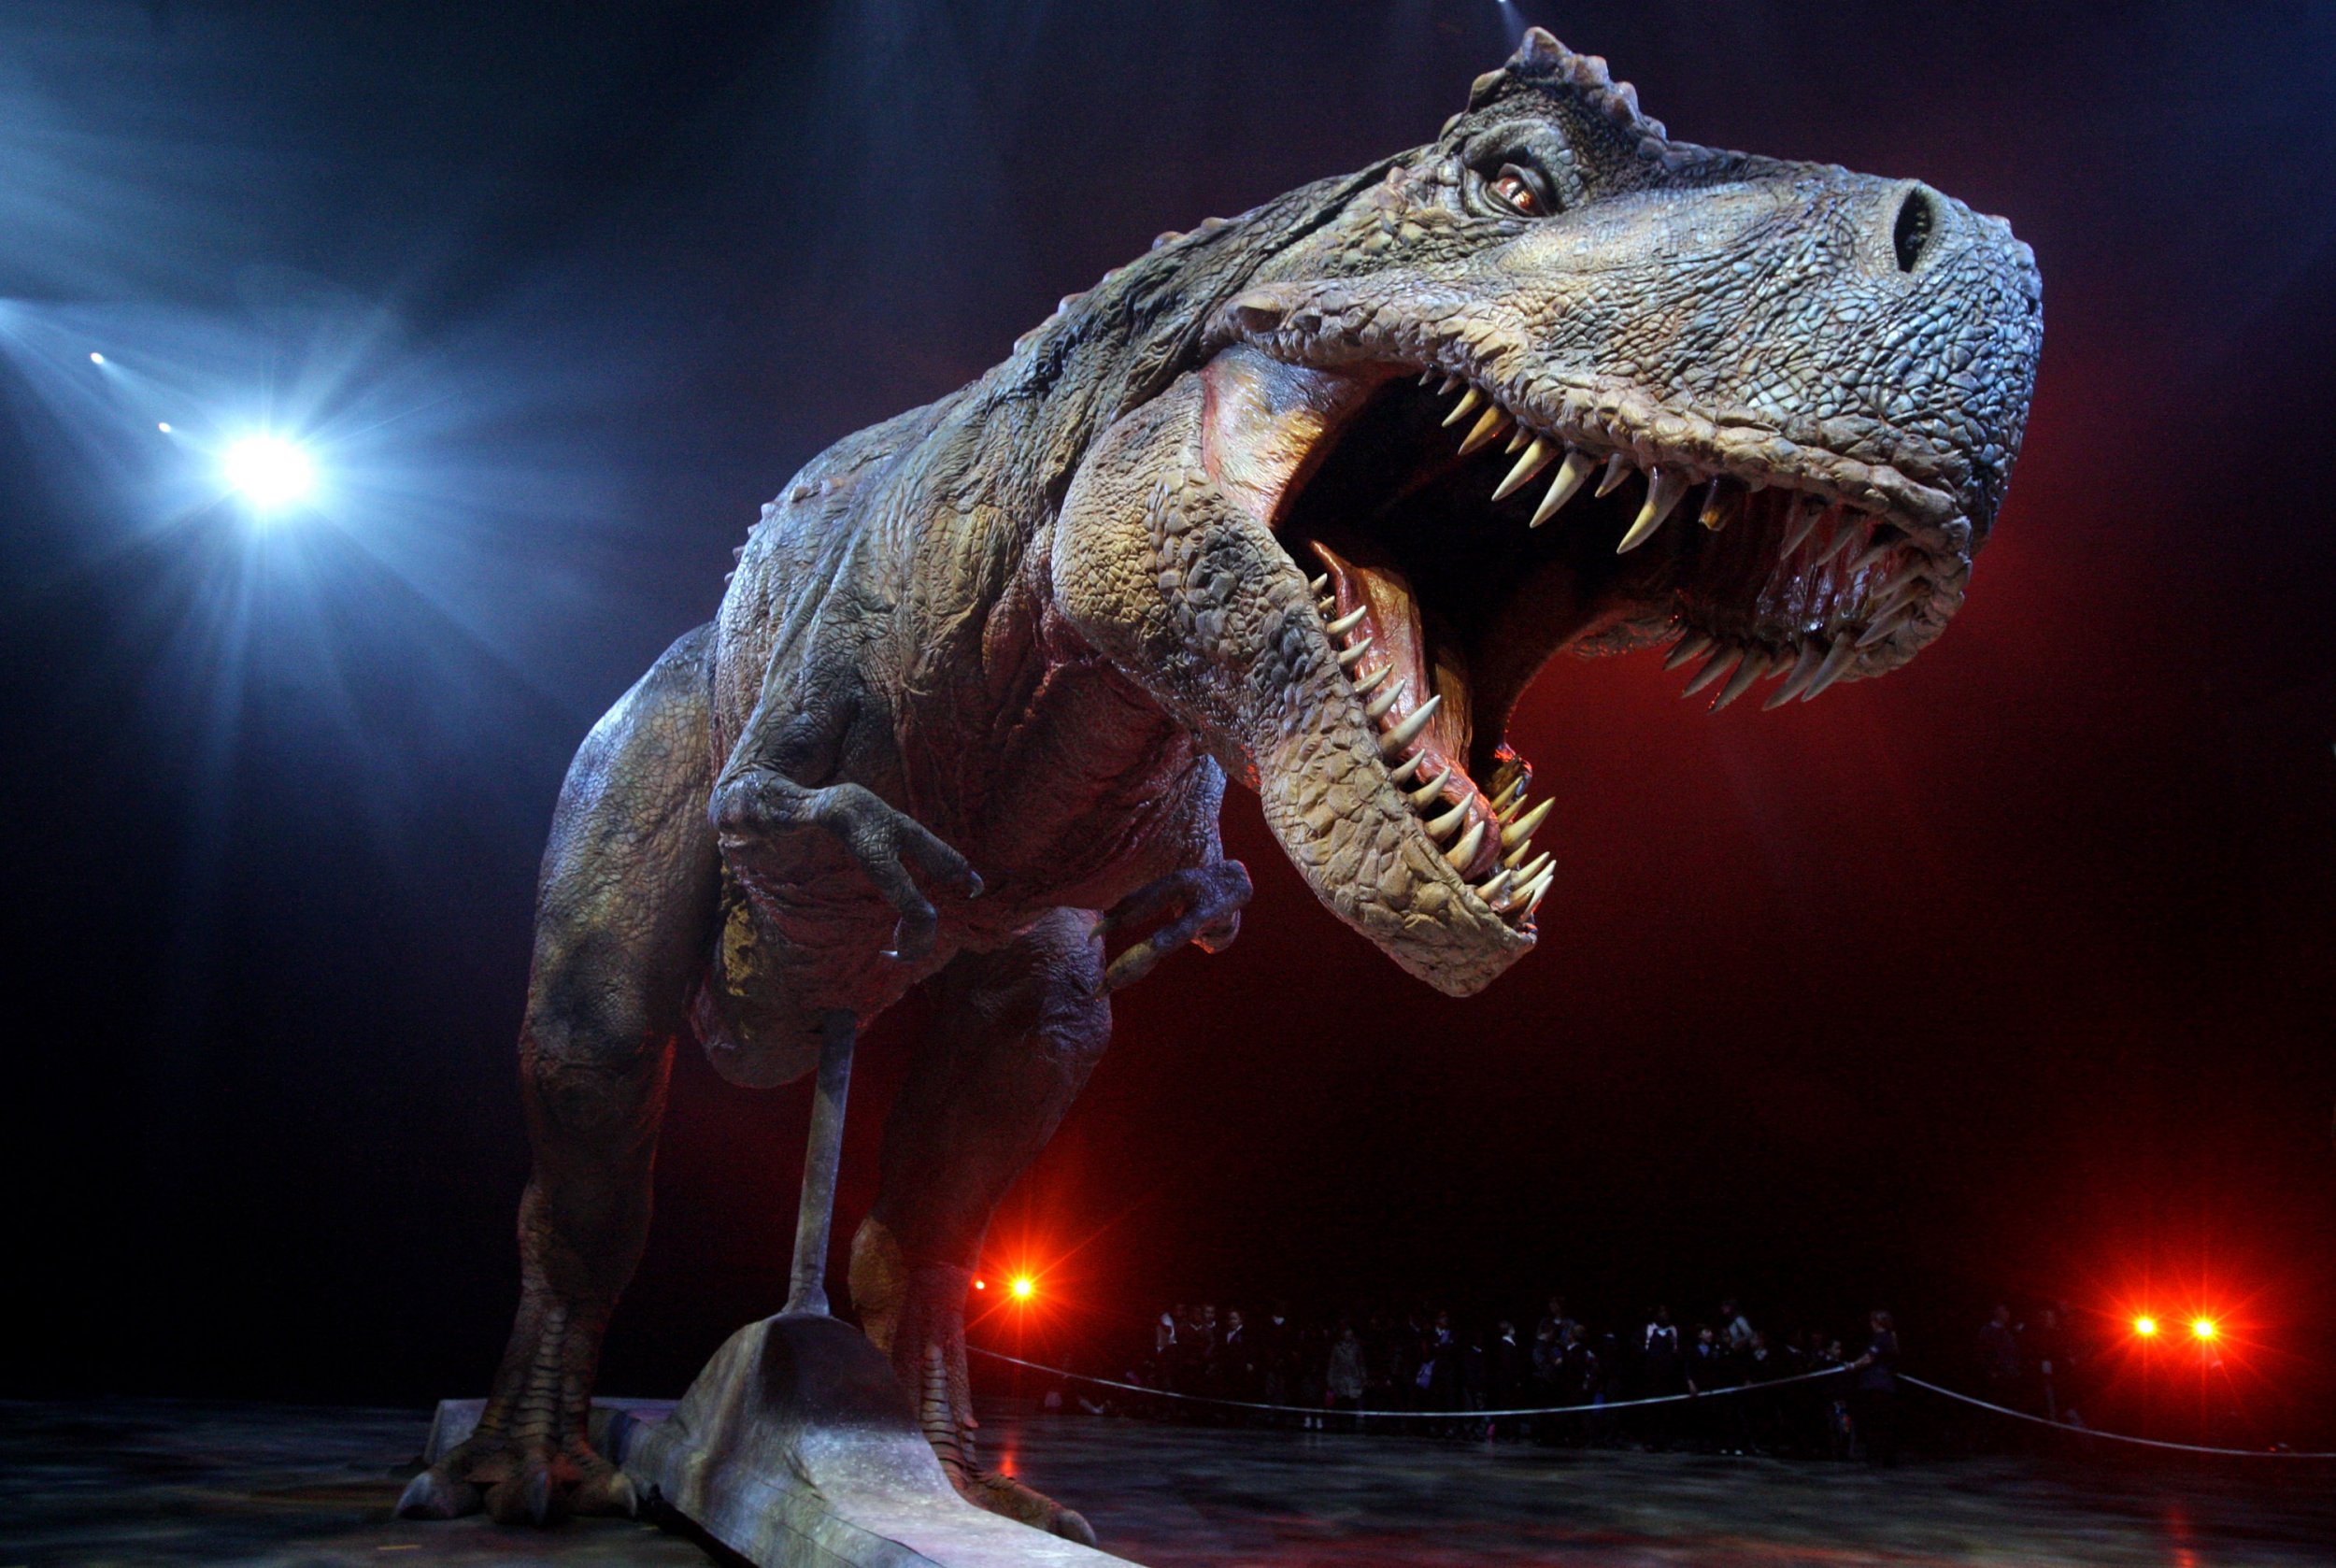 T. Rex Used Its Tiny Arms to 'Viciously Slash' Prey With Huge, De...